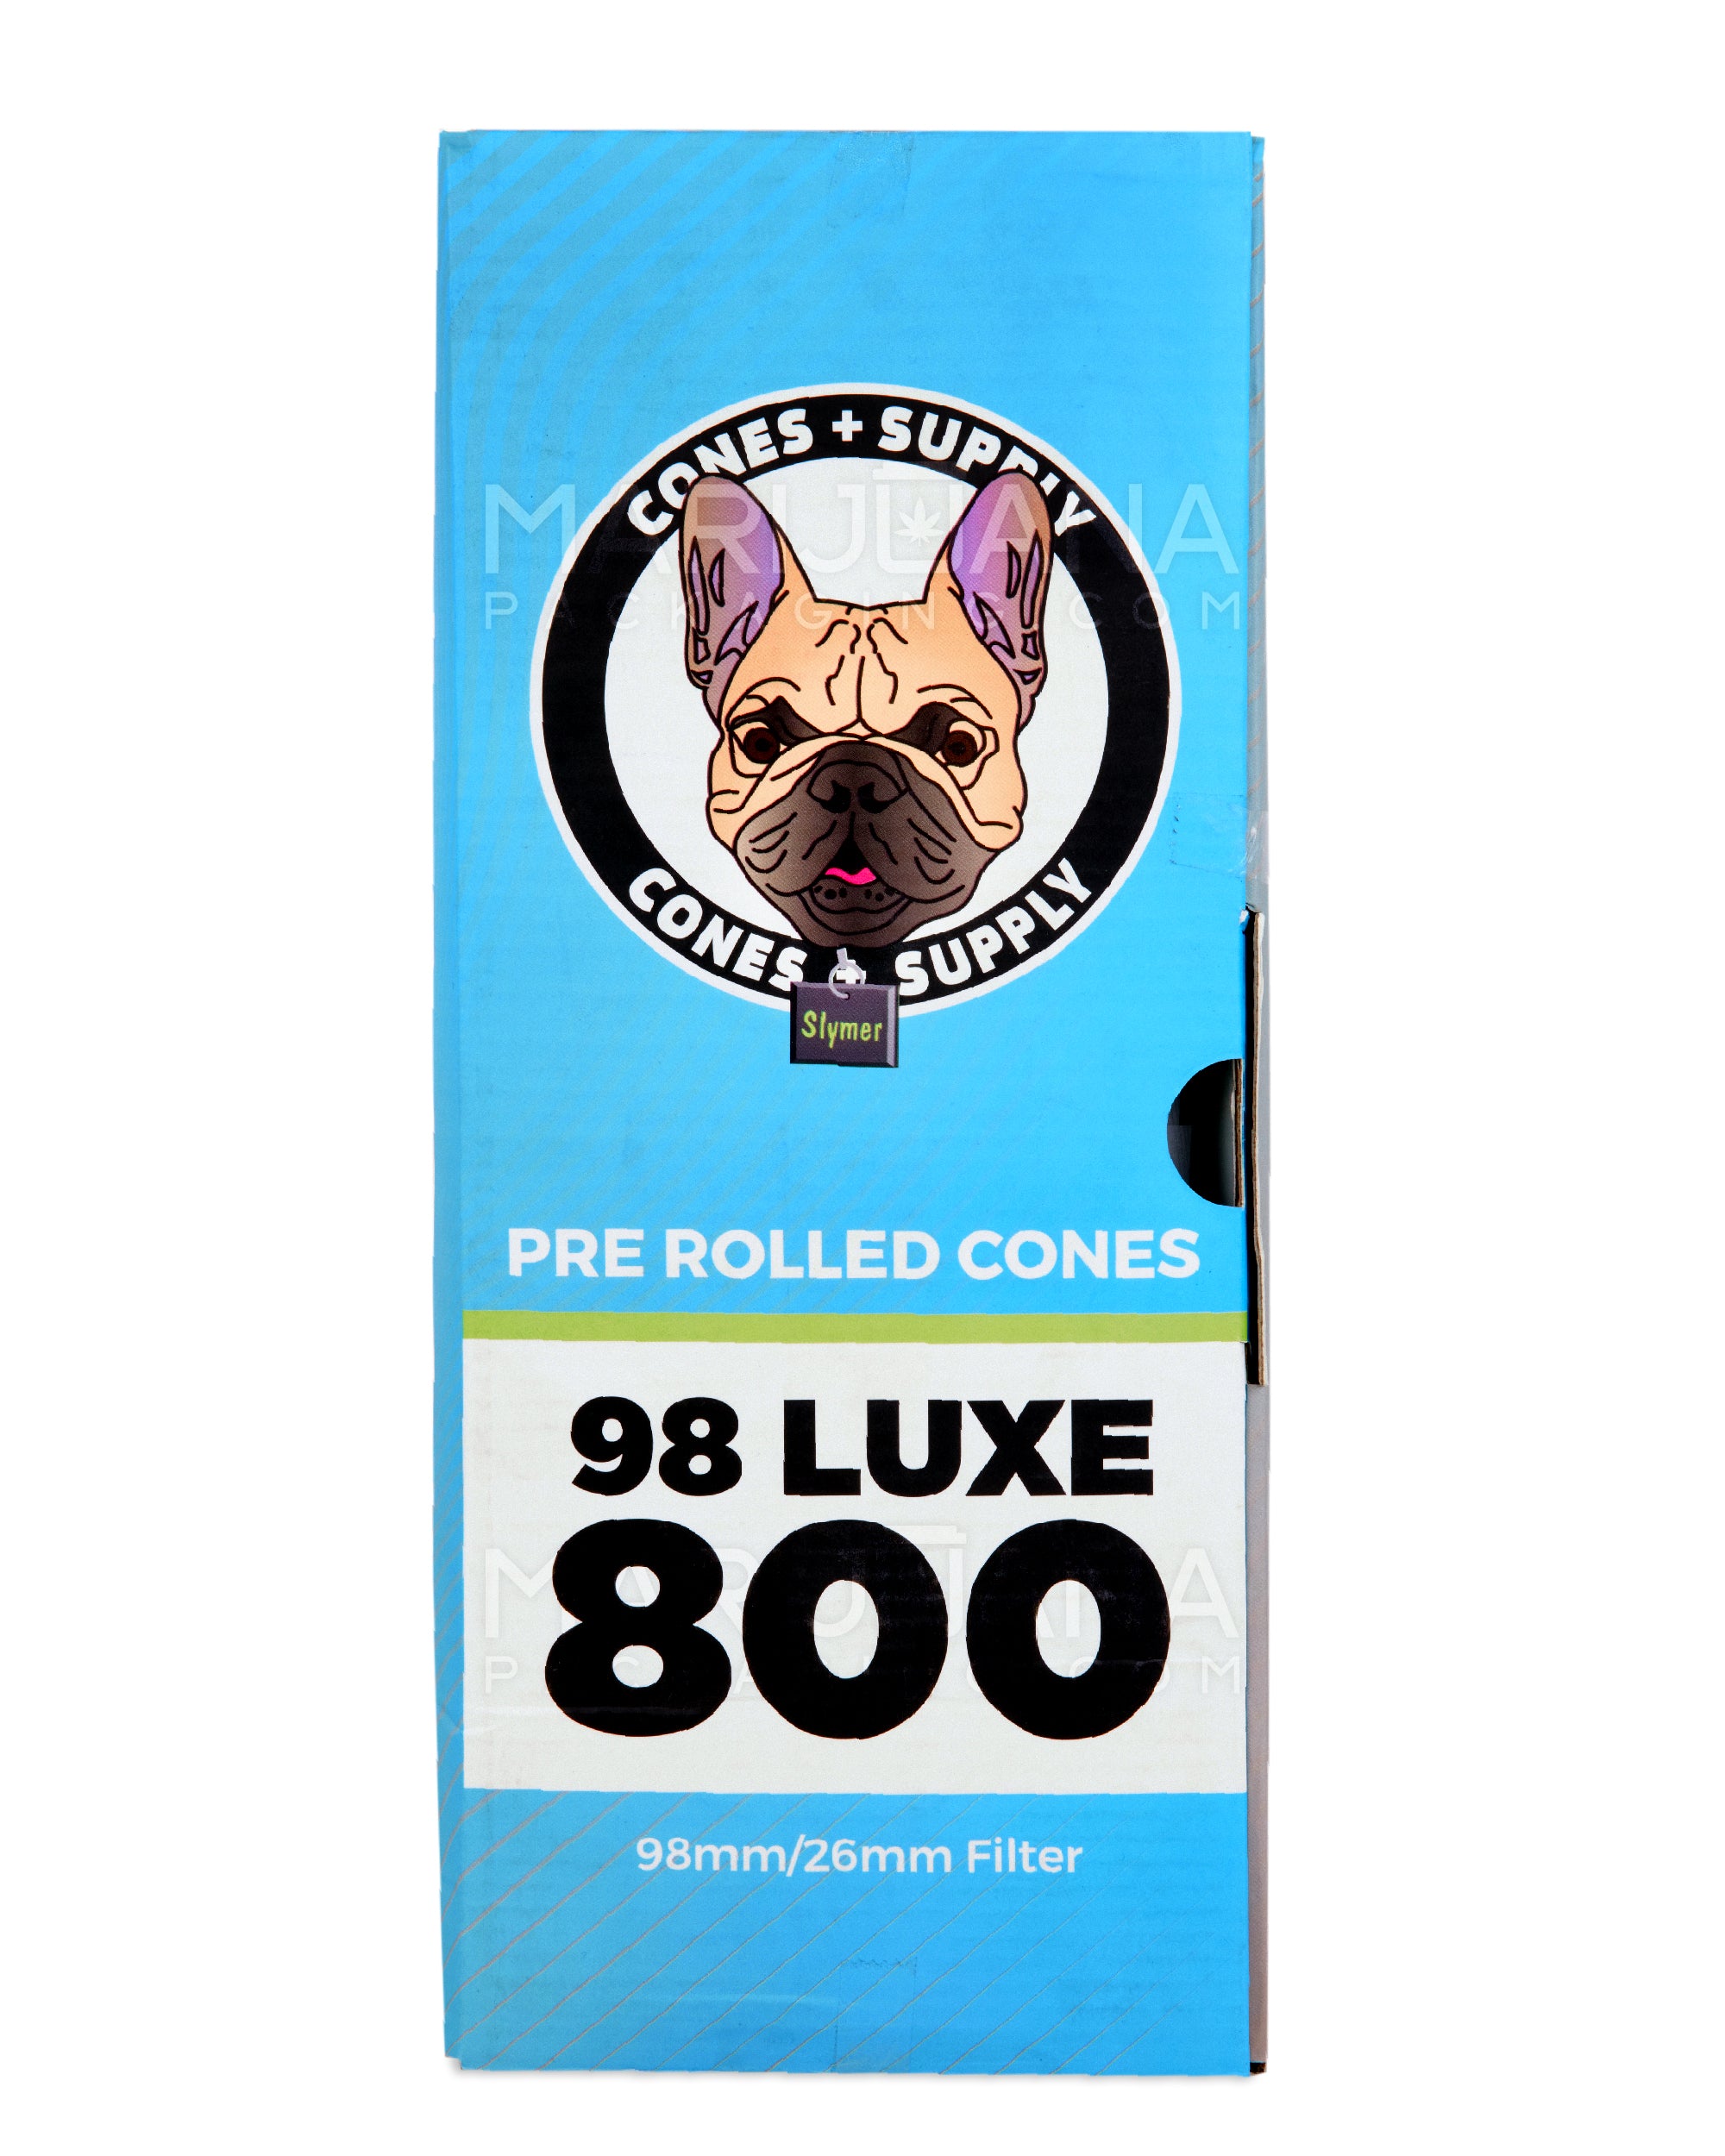 CONES + SUPPLY | 98 Luxe Pre-Rolled Cones | 98mm - Classic White Paper - 800 Count - 5